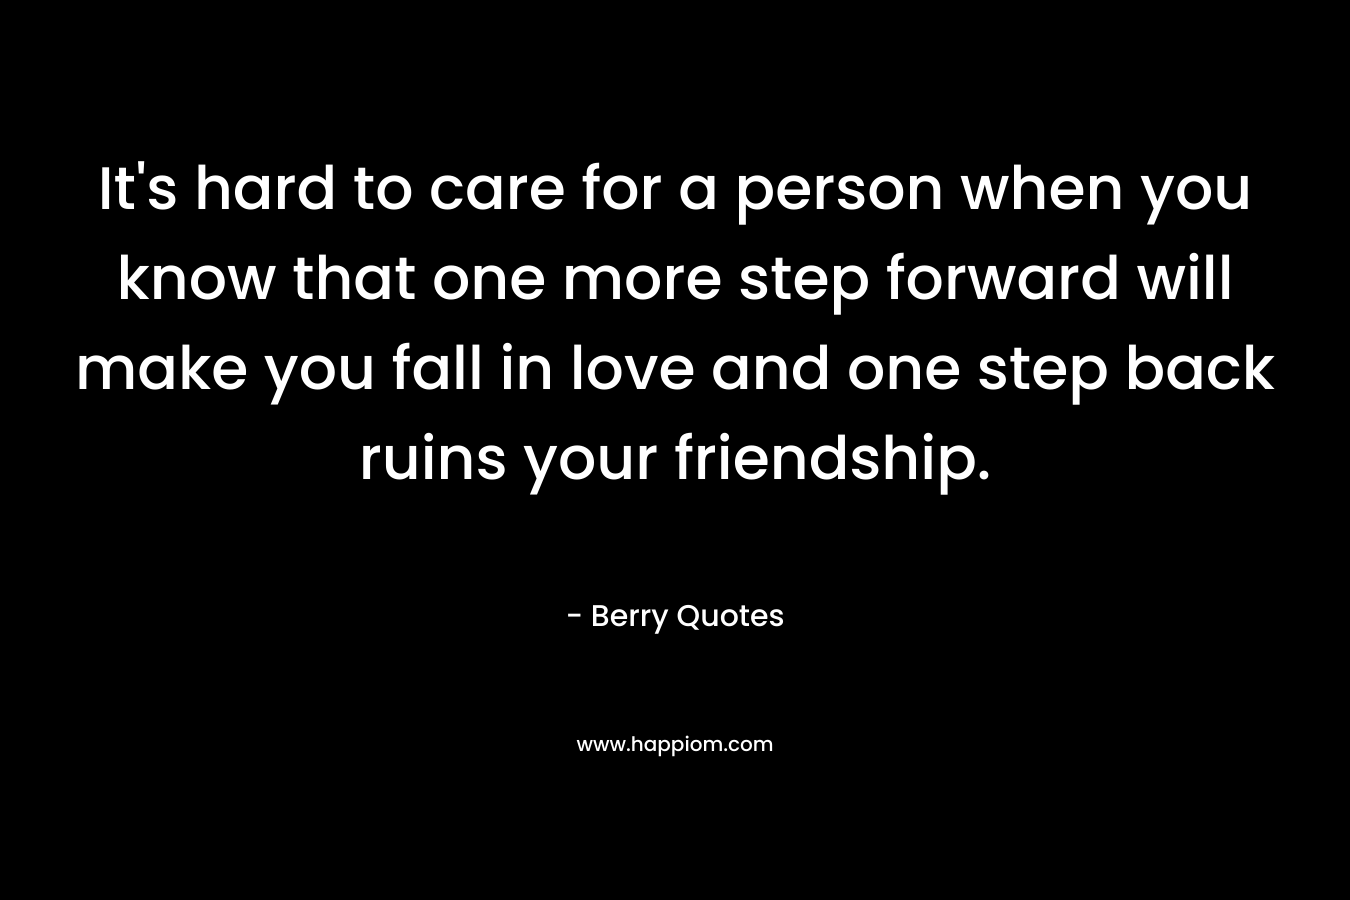 It's hard to care for a person when you know that one more step forward will make you fall in love and one step back ruins your friendship.